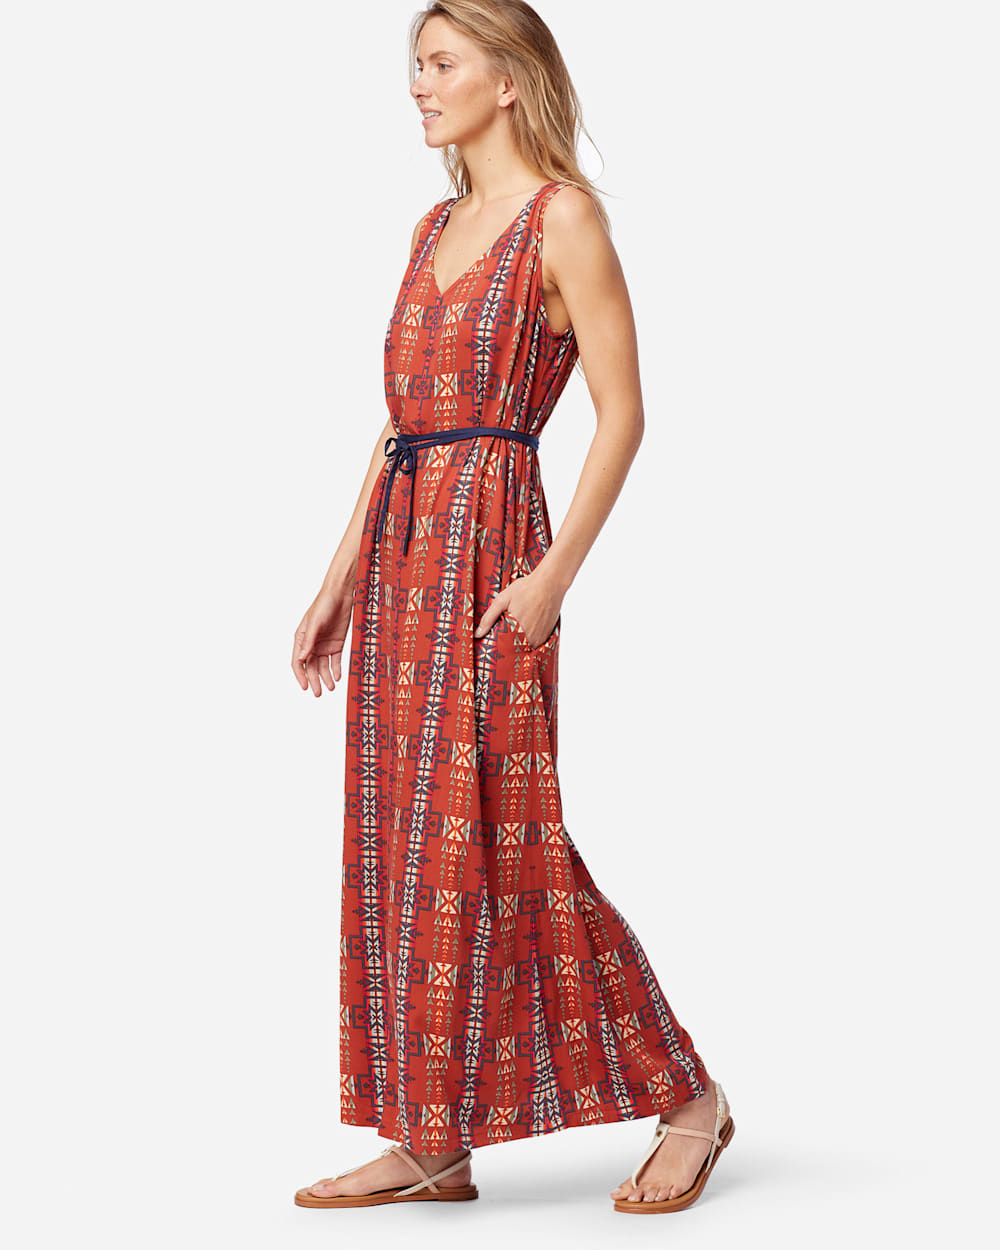 ALTERNATE VIEW OF SLEEVELESS PATTERNED MAXI DRESS IN RED OCHRE image number 2